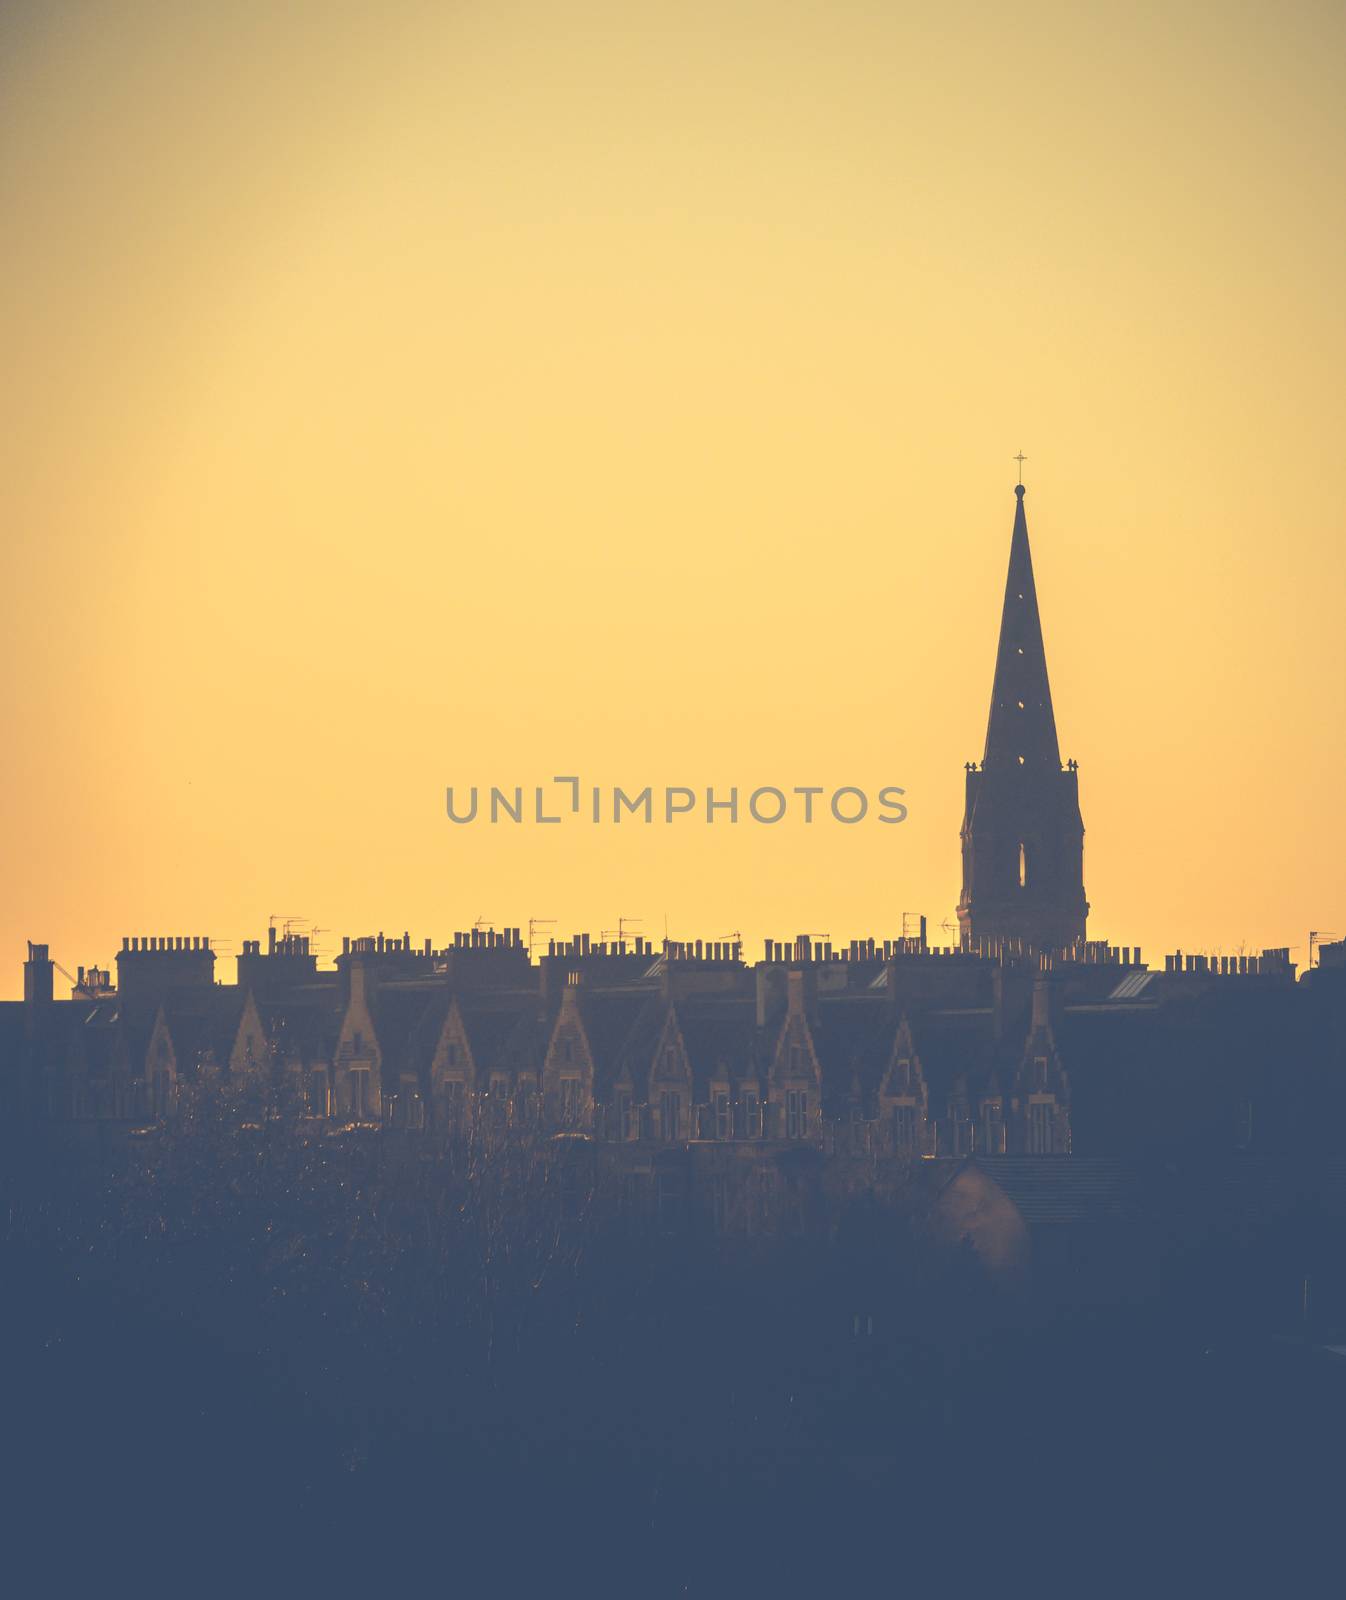 Retro Style Image Of A Row Of Edinburgh Tenement Apartments And Church Spire At Sunset